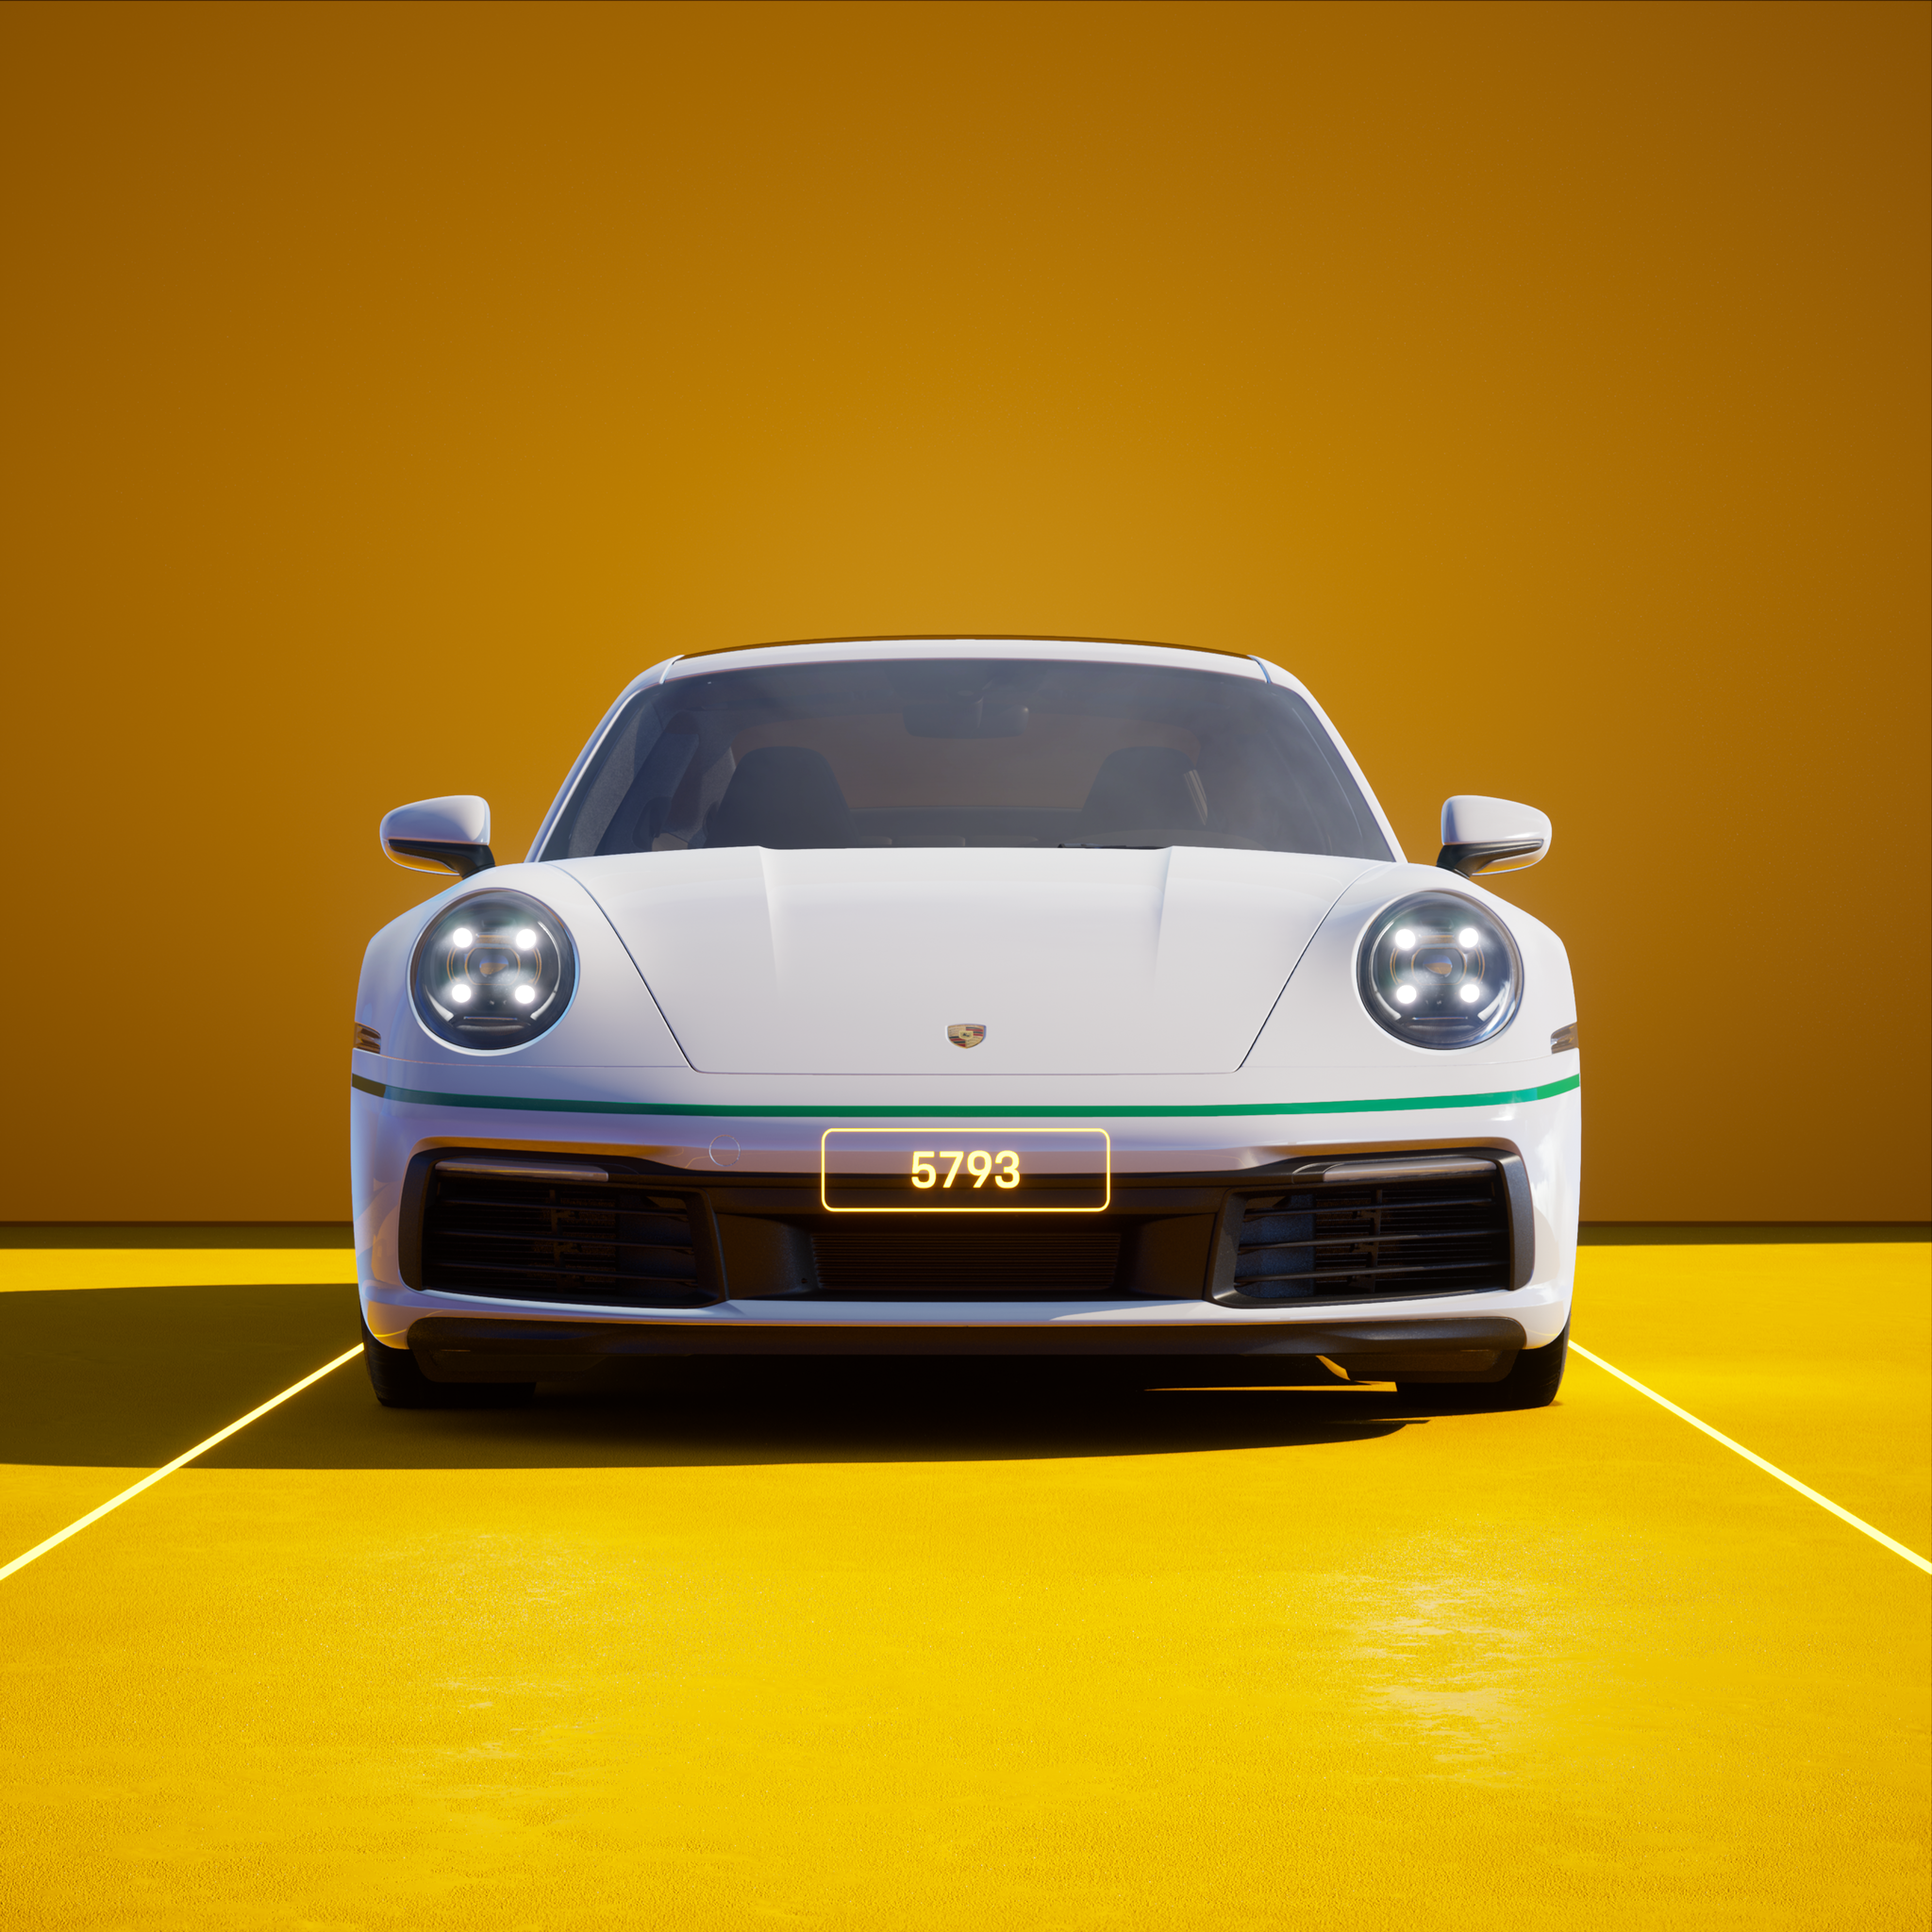 The PORSCHΞ 911 5793 image in phase